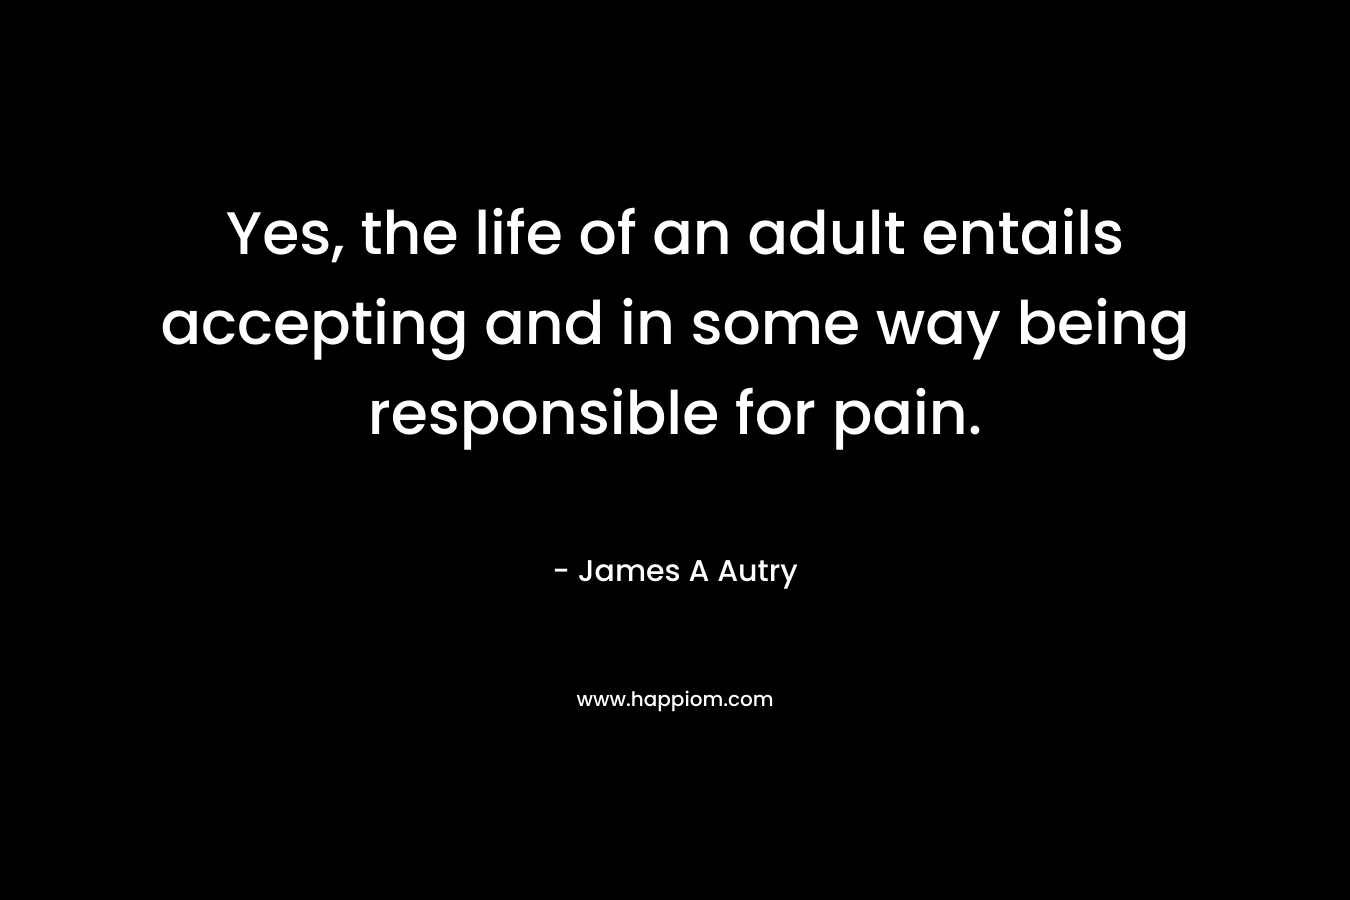 Yes, the life of an adult entails accepting and in some way being responsible for pain. – James A Autry